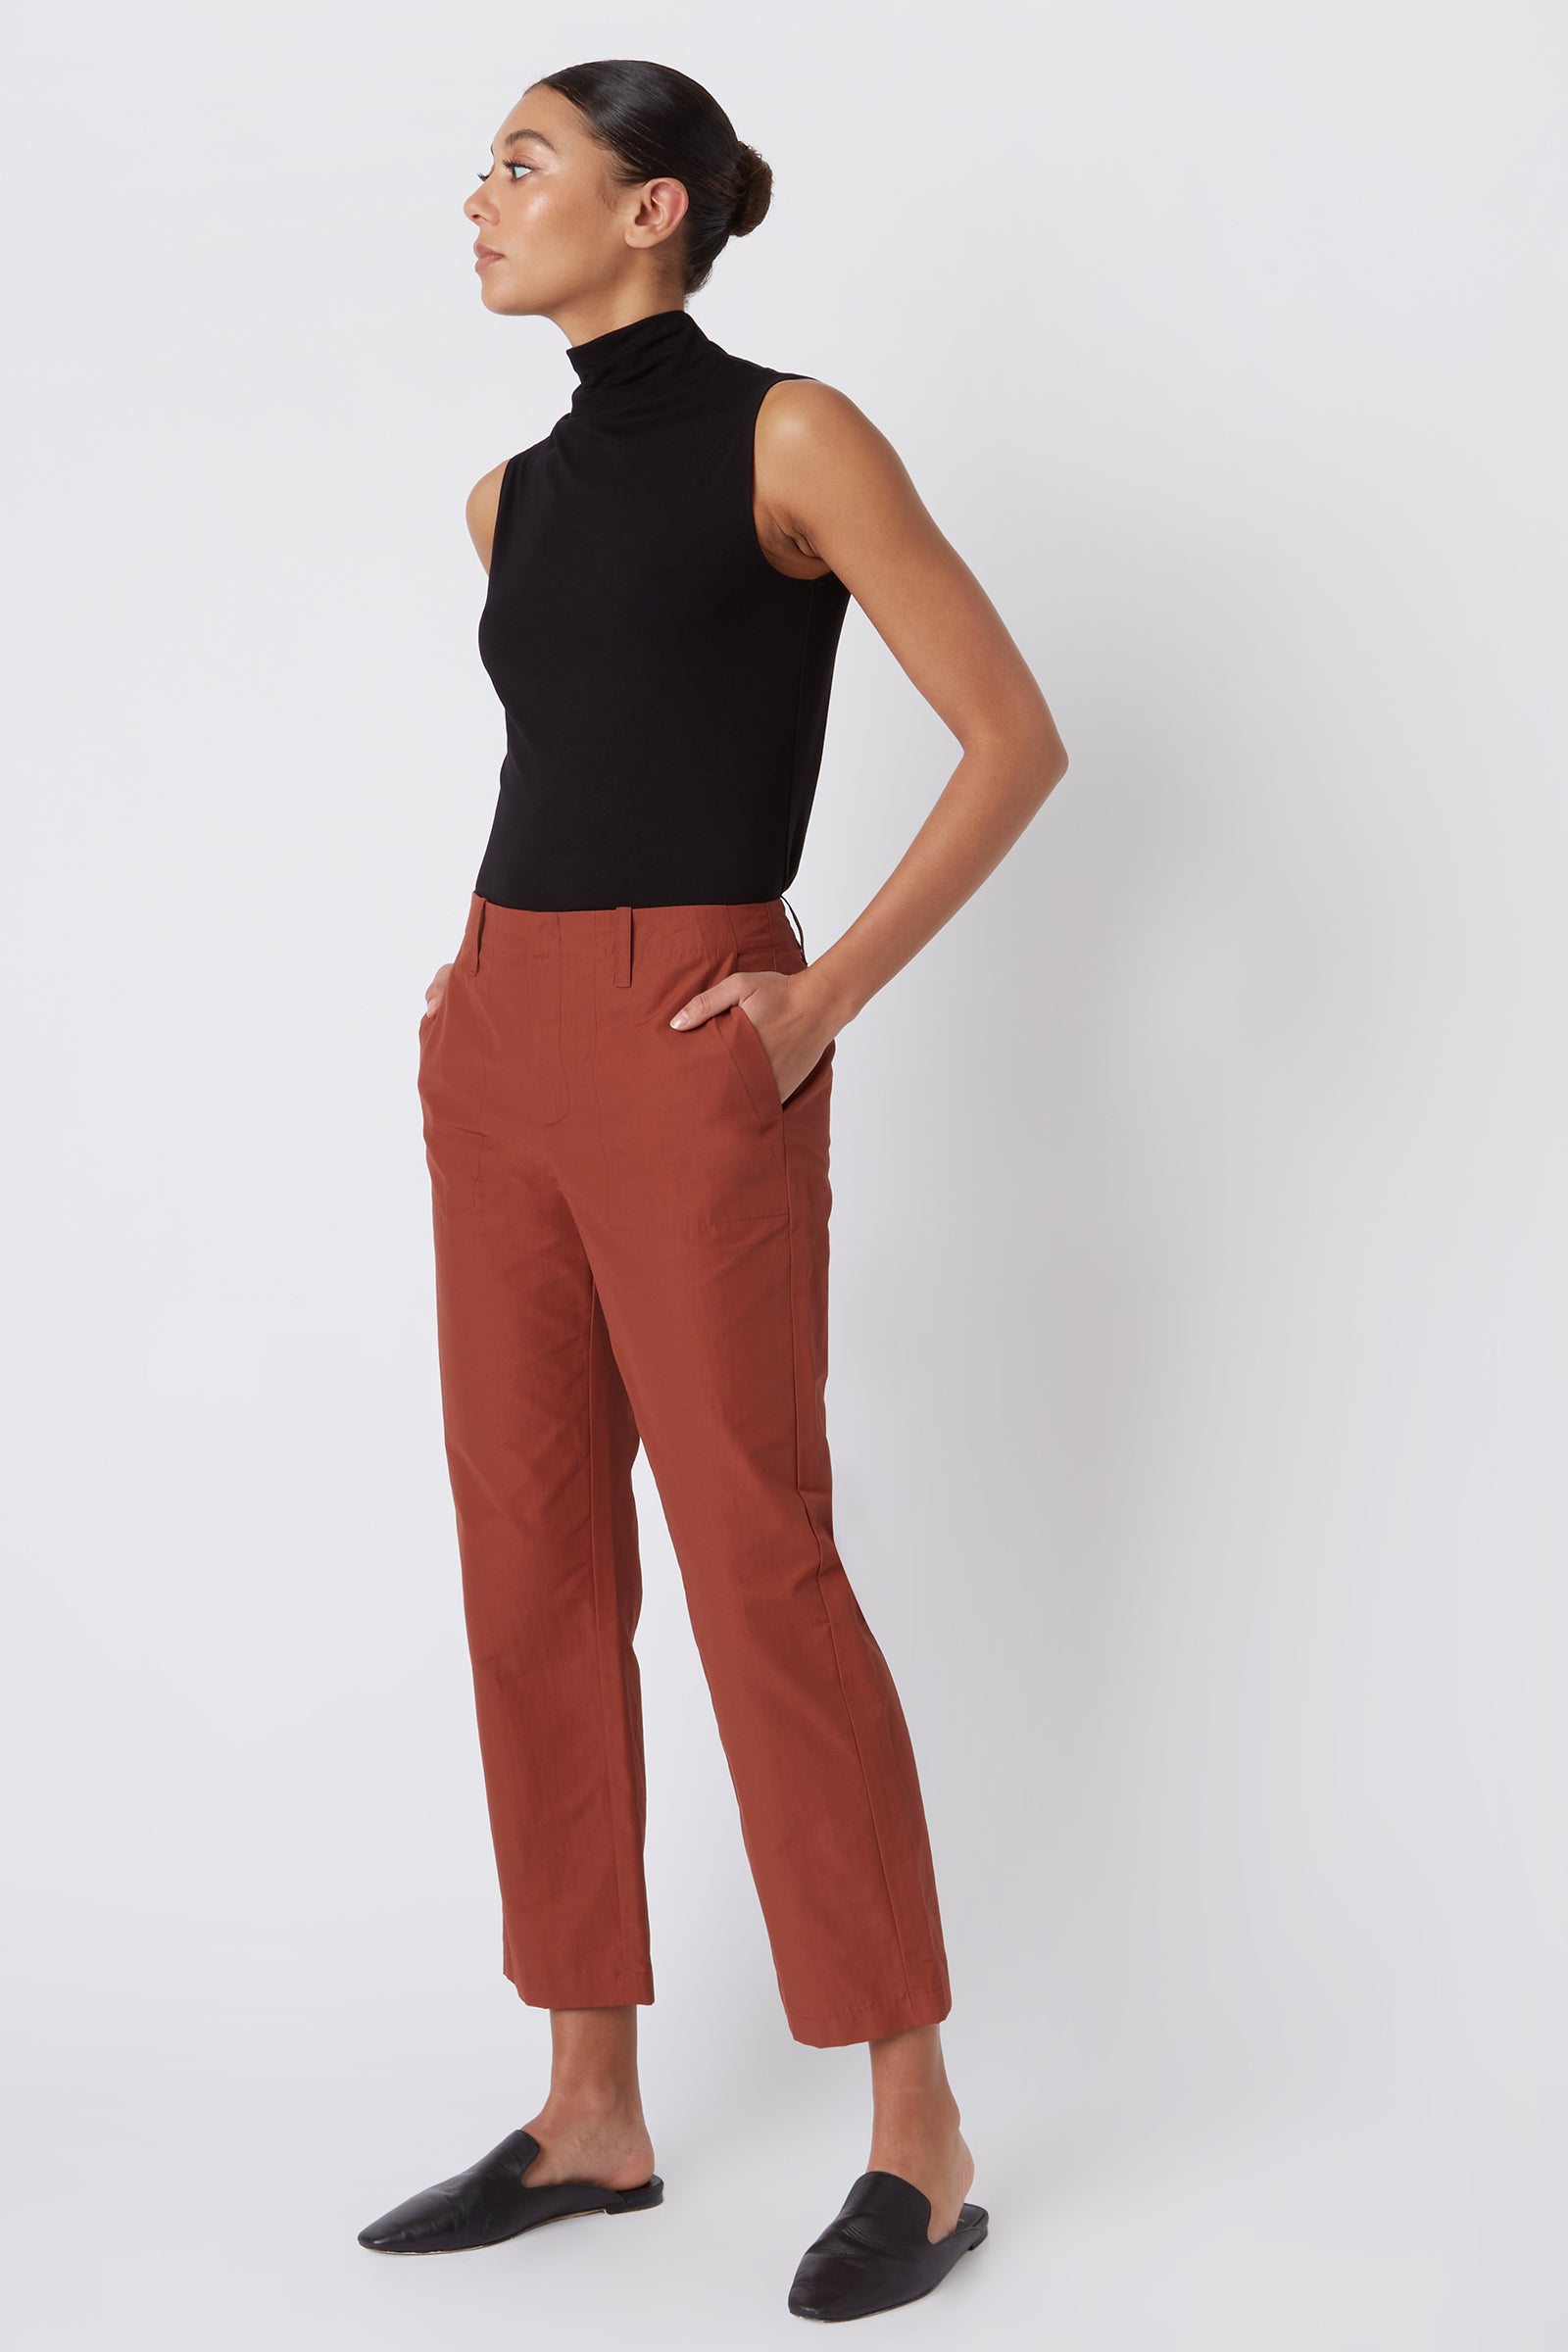 Kal Rieman Francoise Cigarette Pant in Rust Italian Broadcloth on Model with Hands in Pockets Full Side View